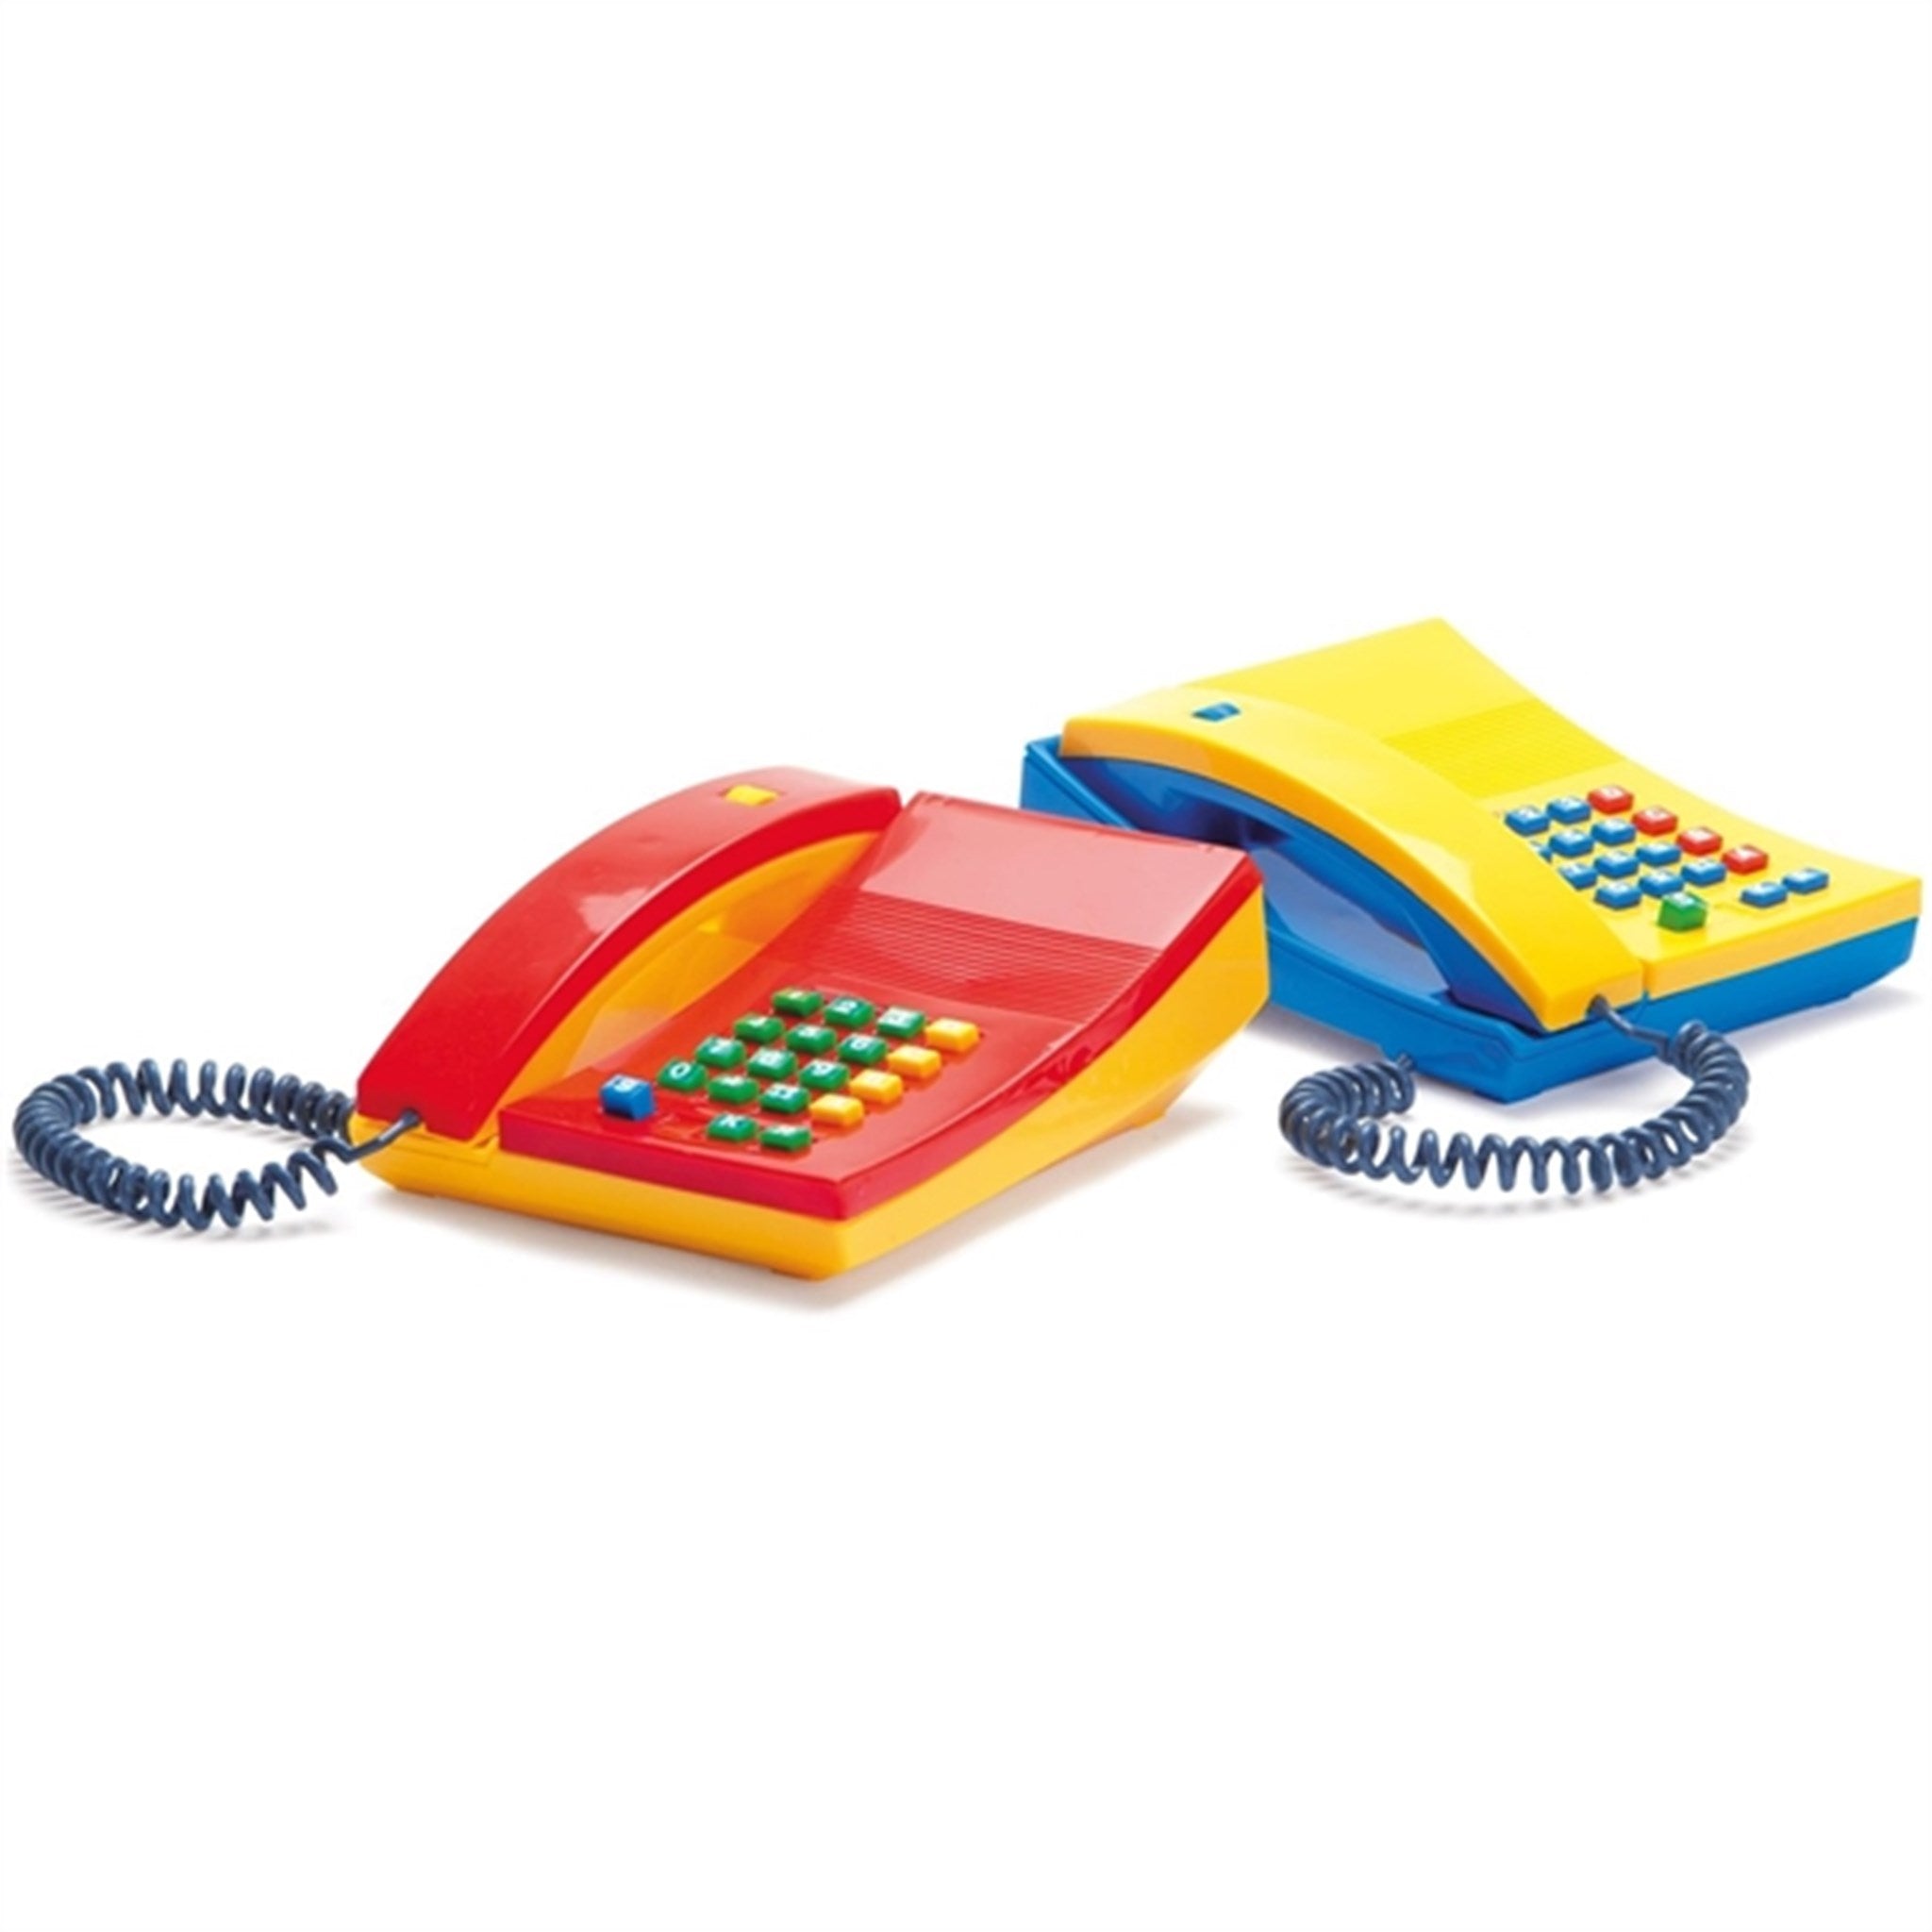 Dantoy Telephone With Push-Button